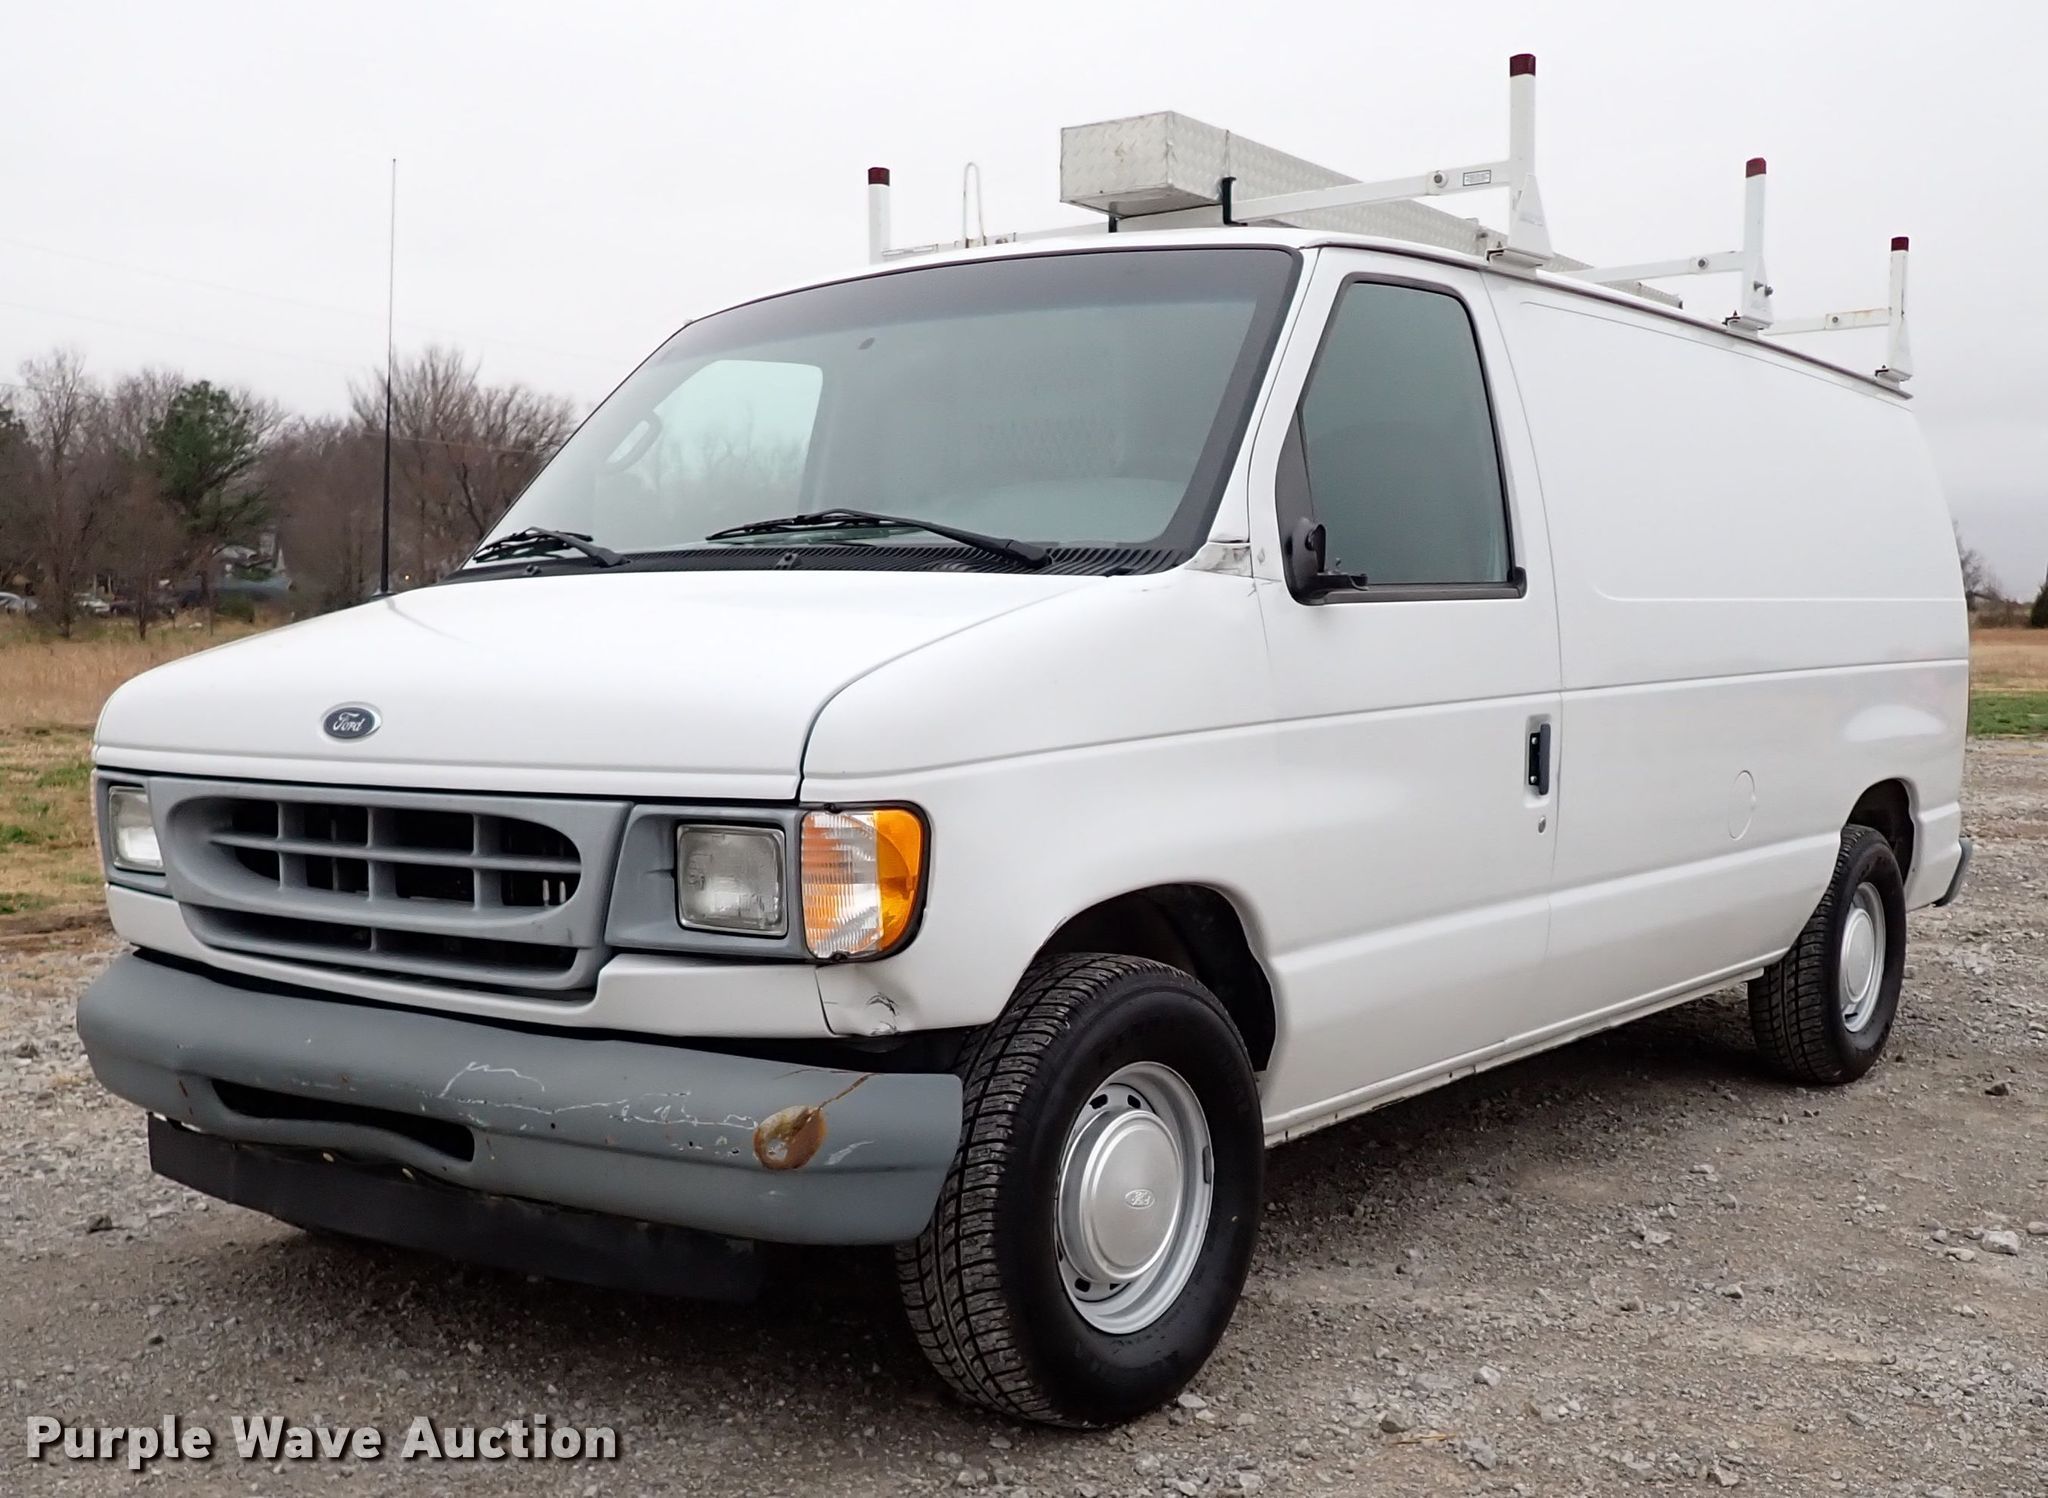 2002 Ford E150 van in Collinsville, OK | Item IS9310 sold | Purple Wave